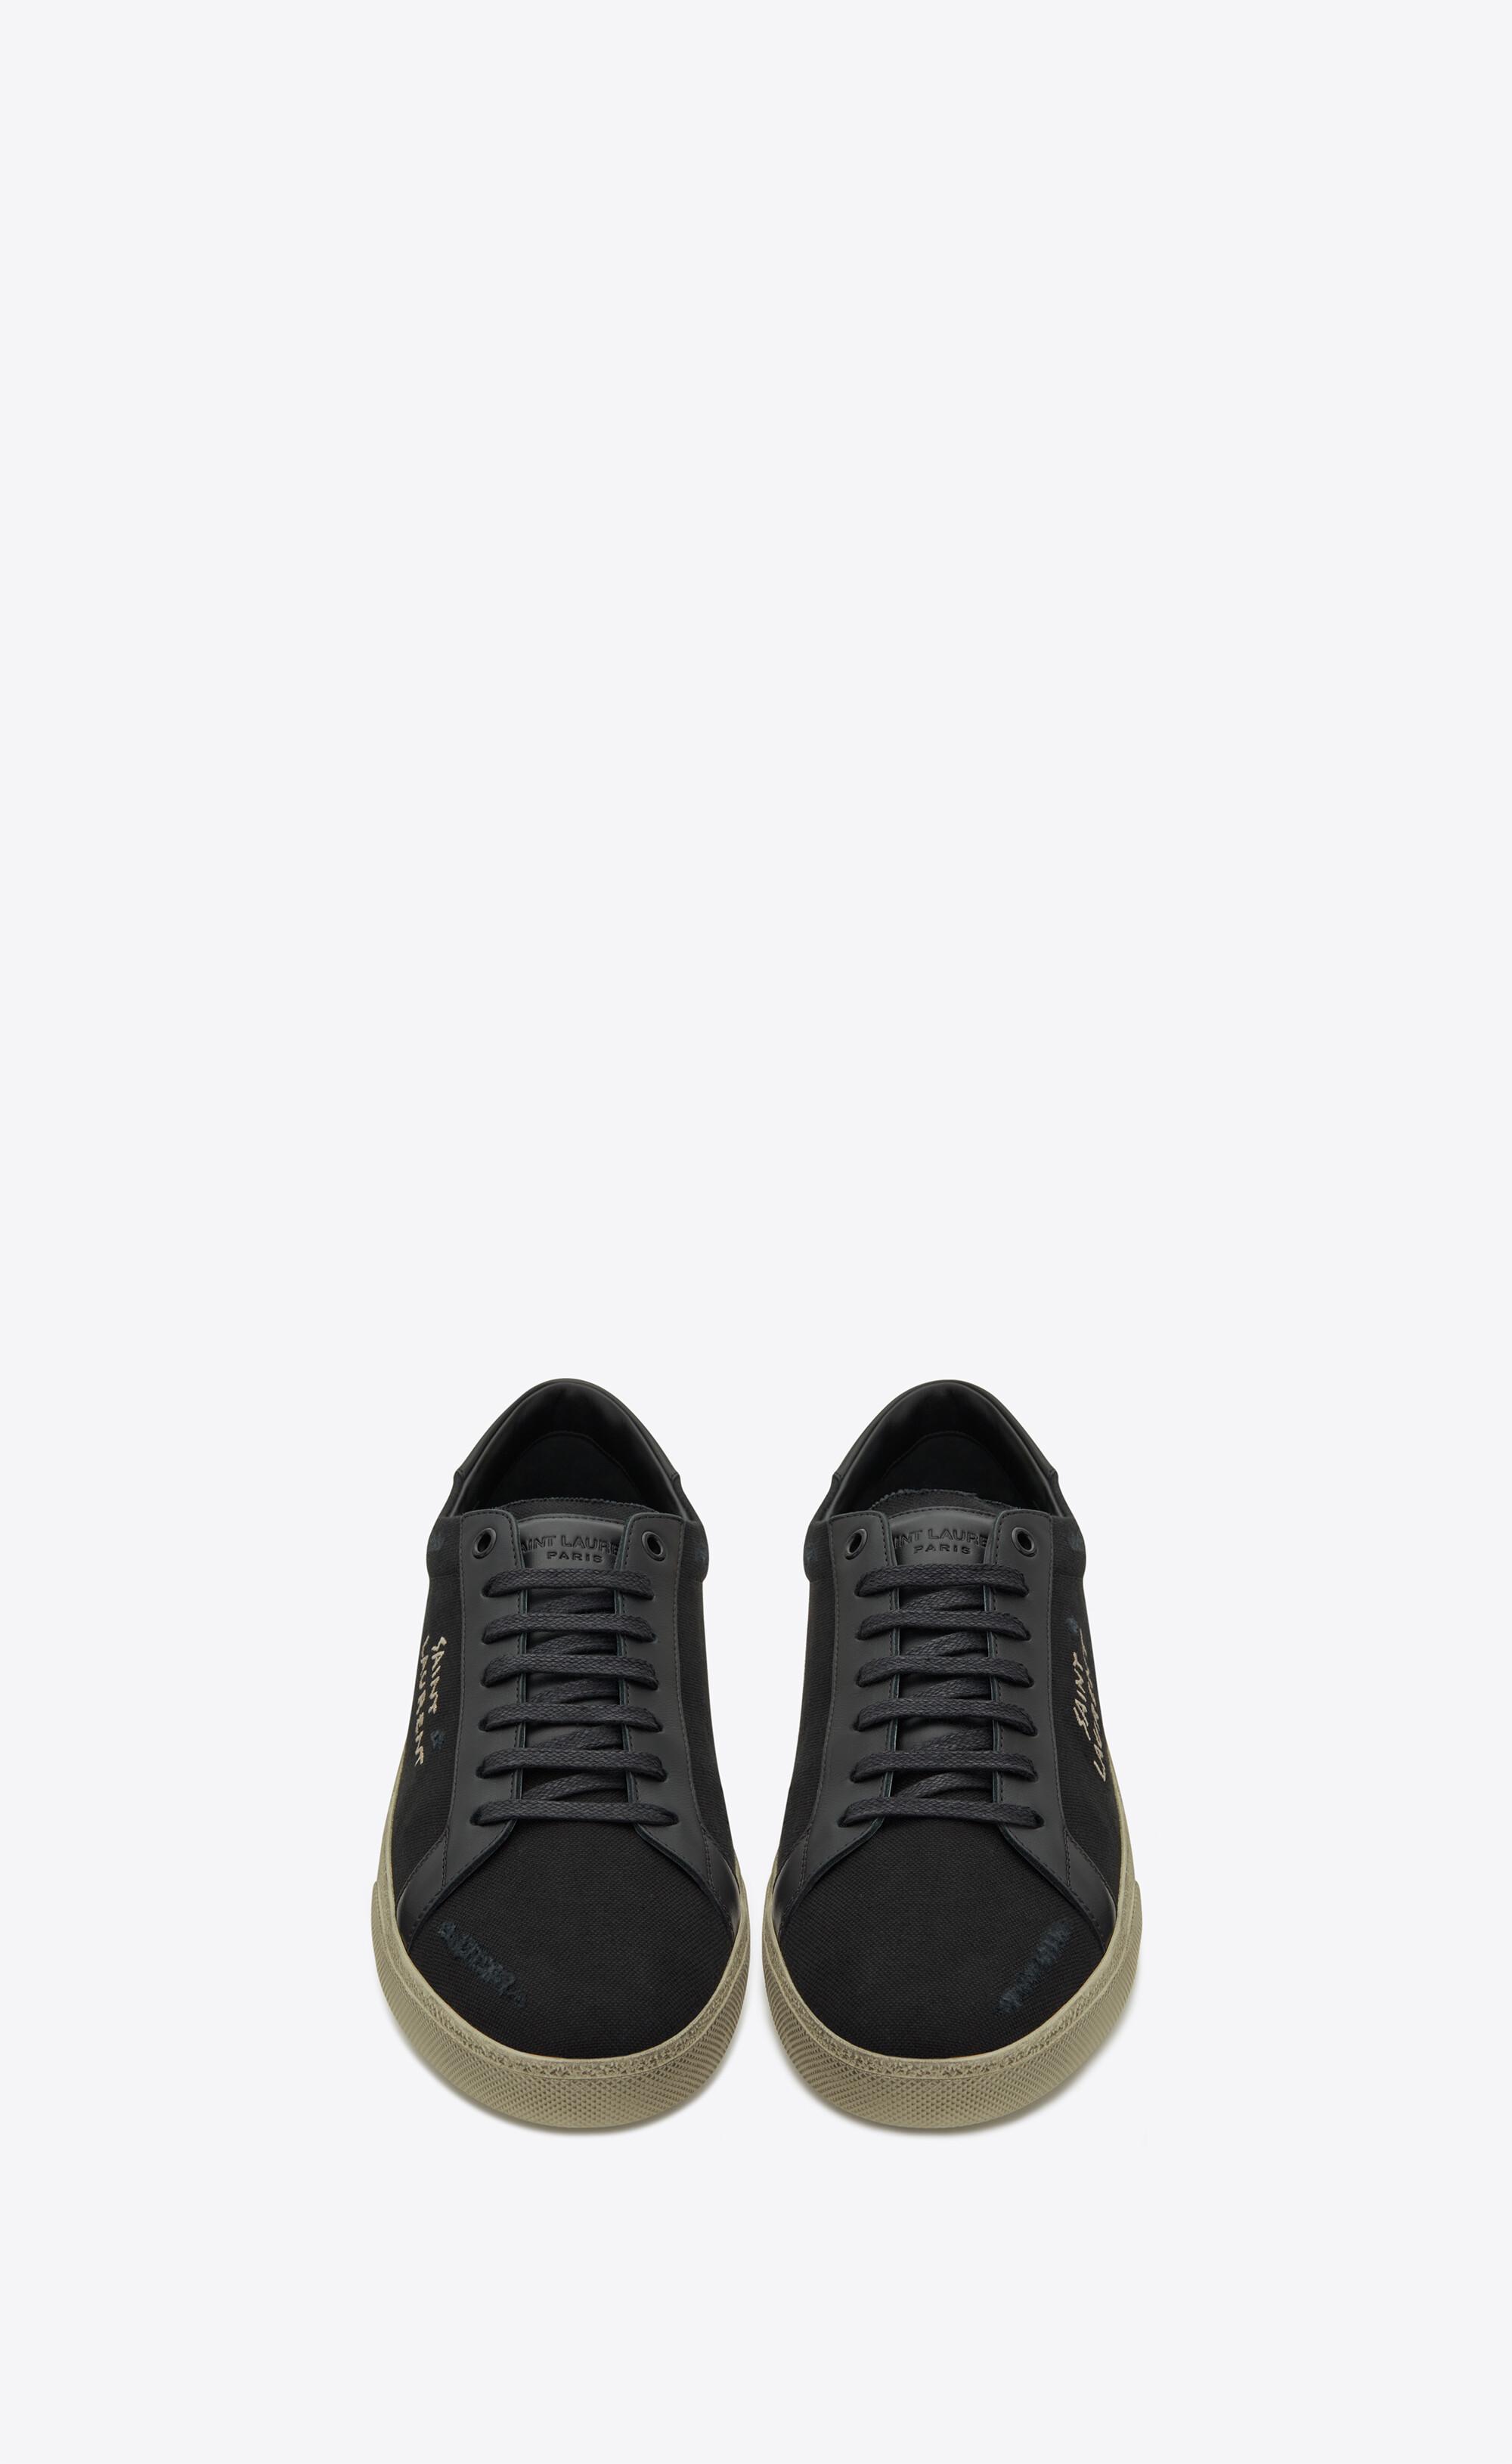 Saint Laurent Court Classic Sl/06 Embroidered Sneakers In Canvas And Smooth  Leather in Black for Men - Lyst